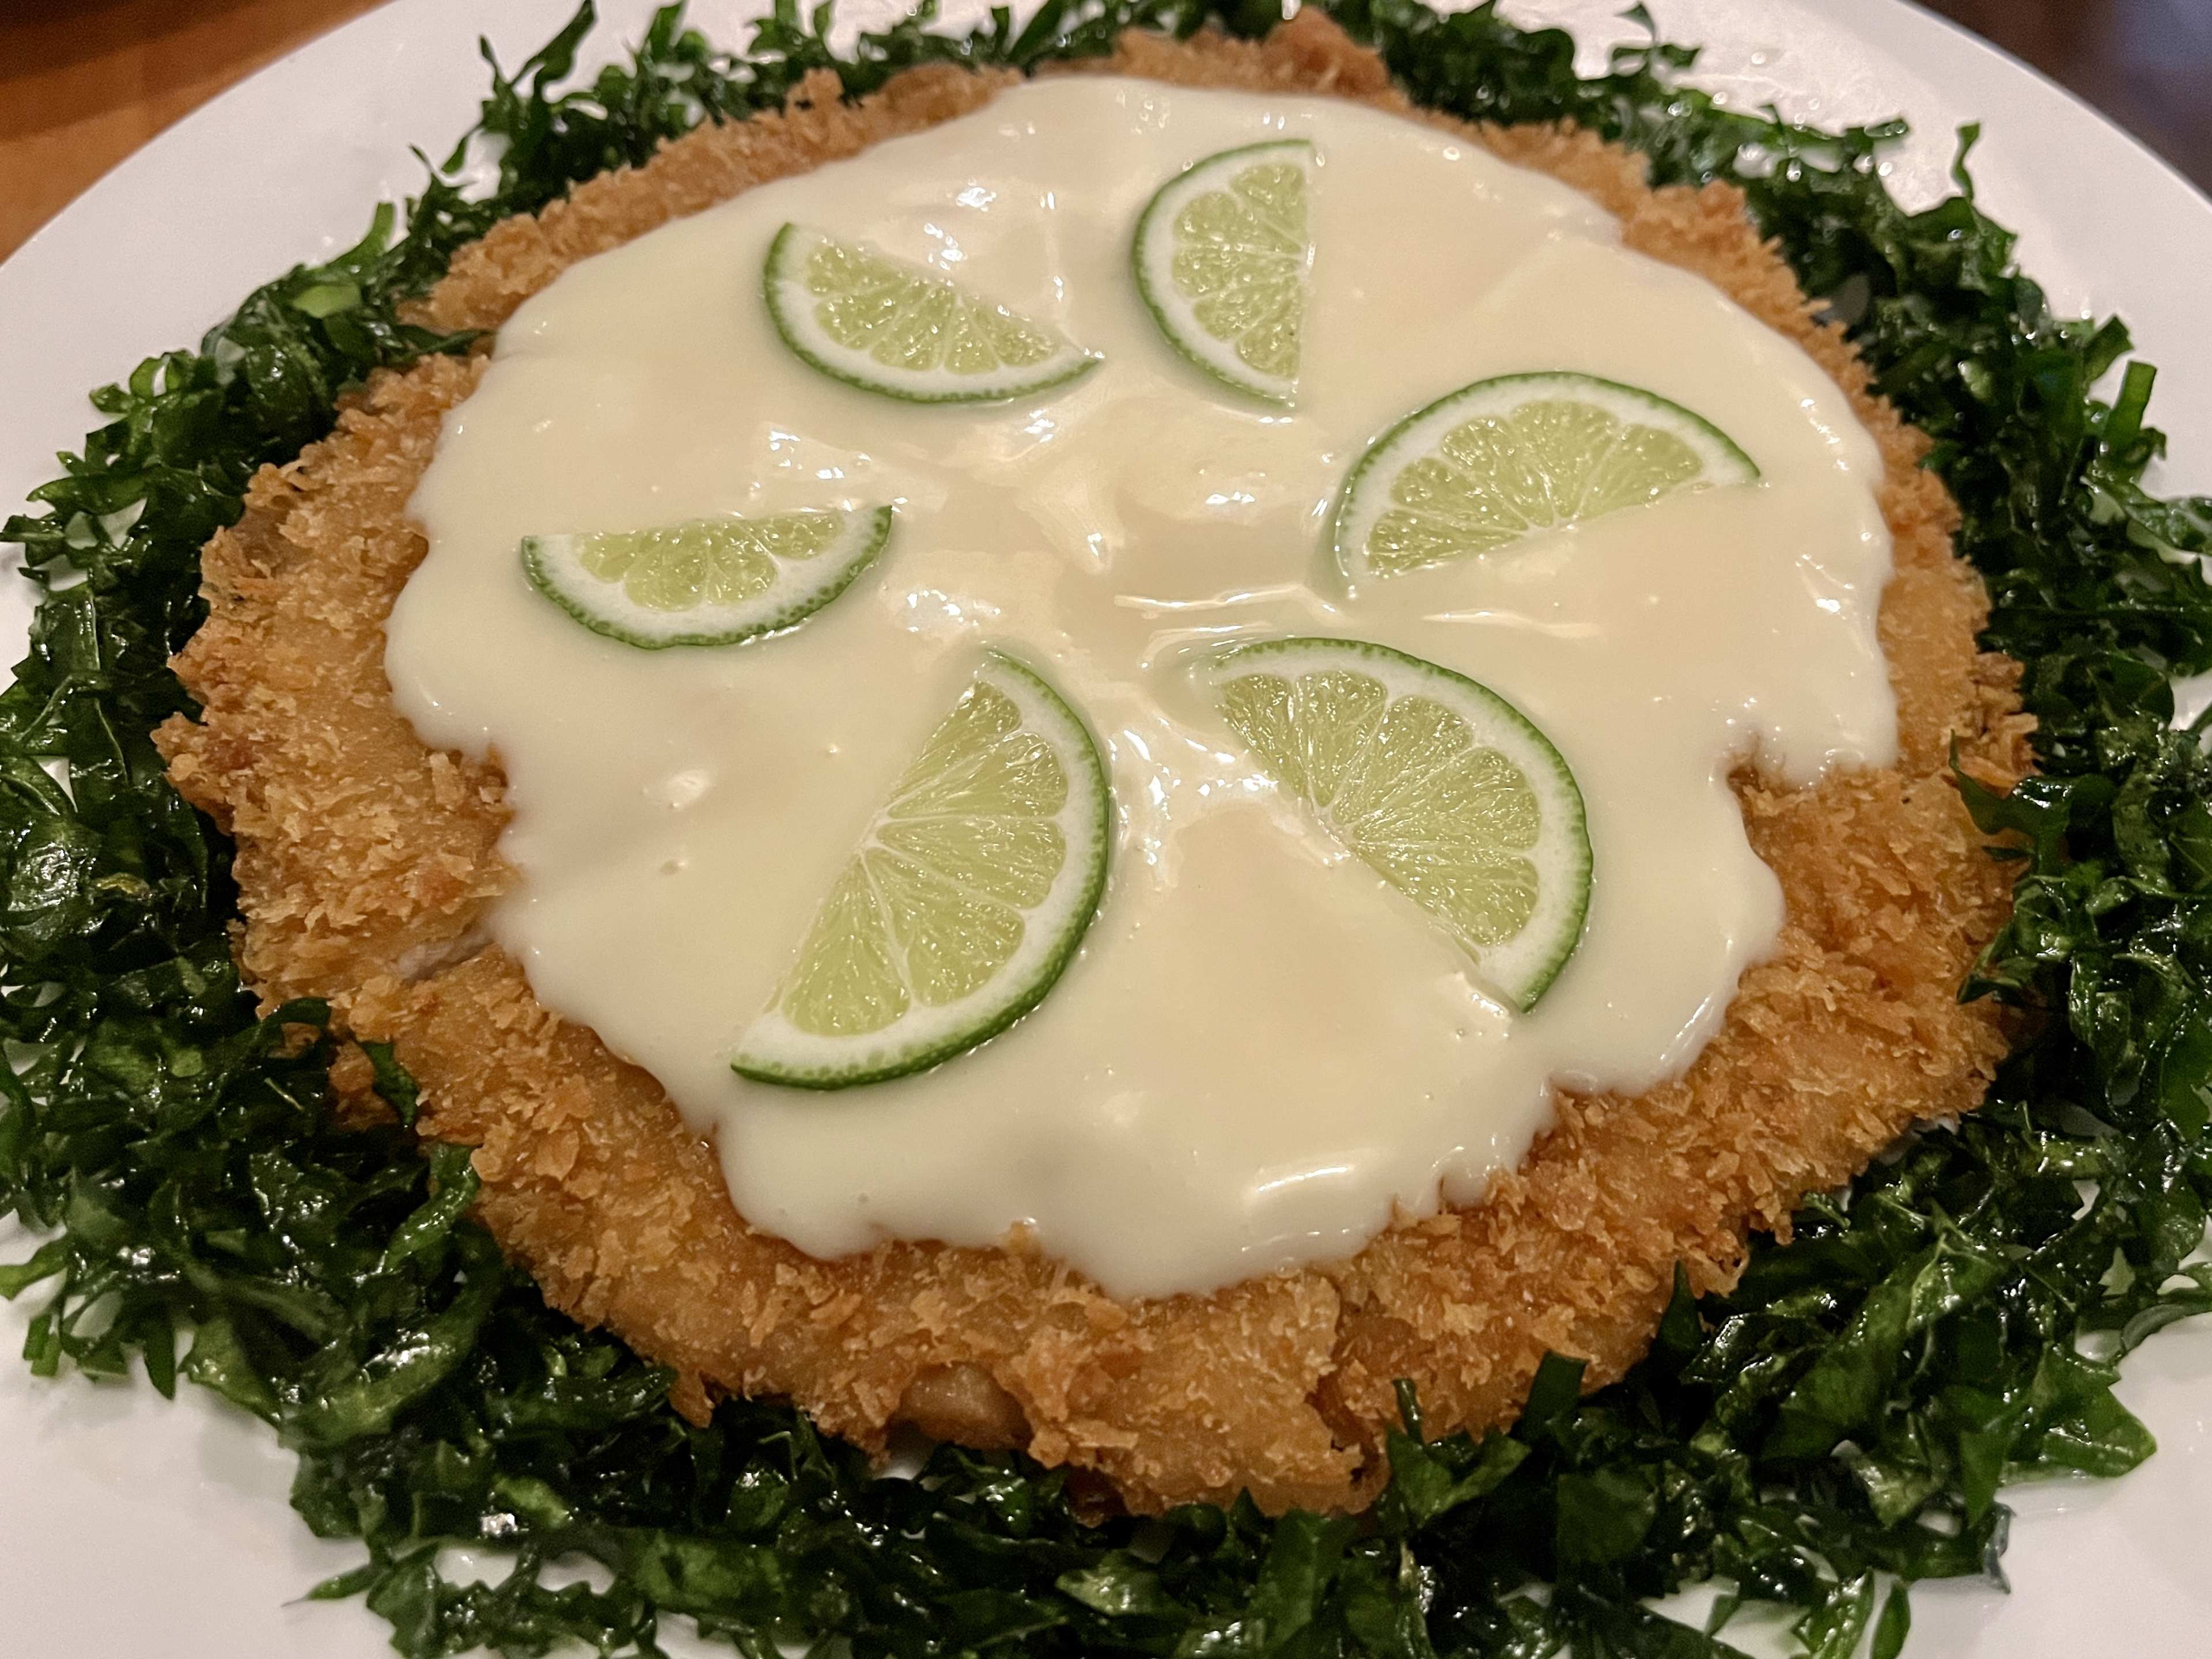 Fried chicken patty covered with a glaze and limes.